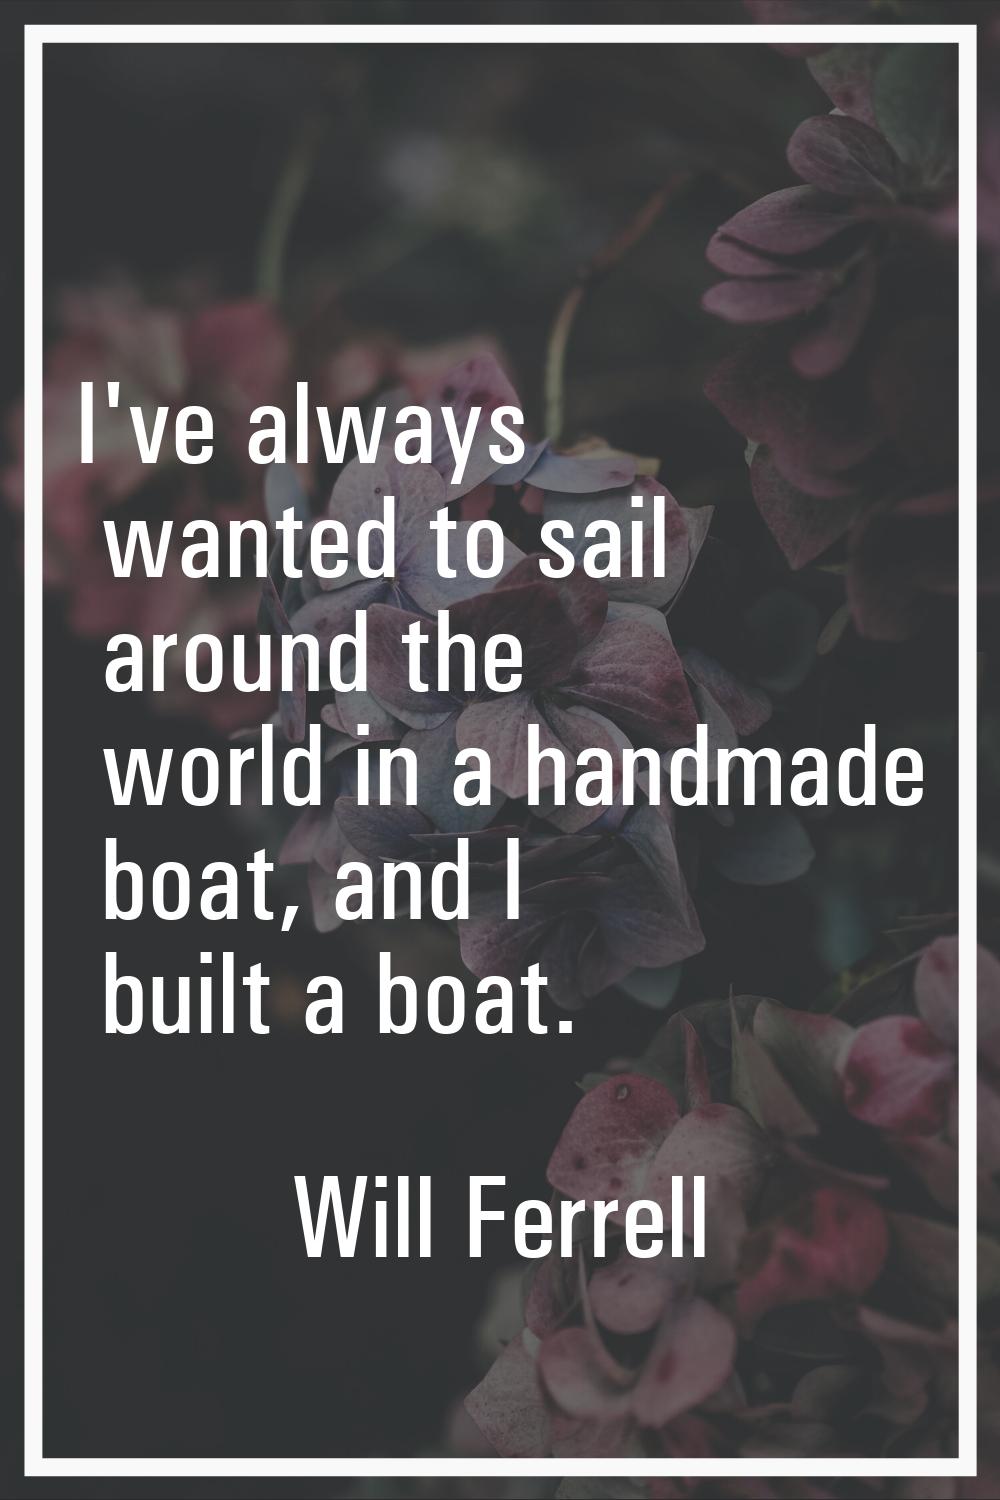 I've always wanted to sail around the world in a handmade boat, and I built a boat.